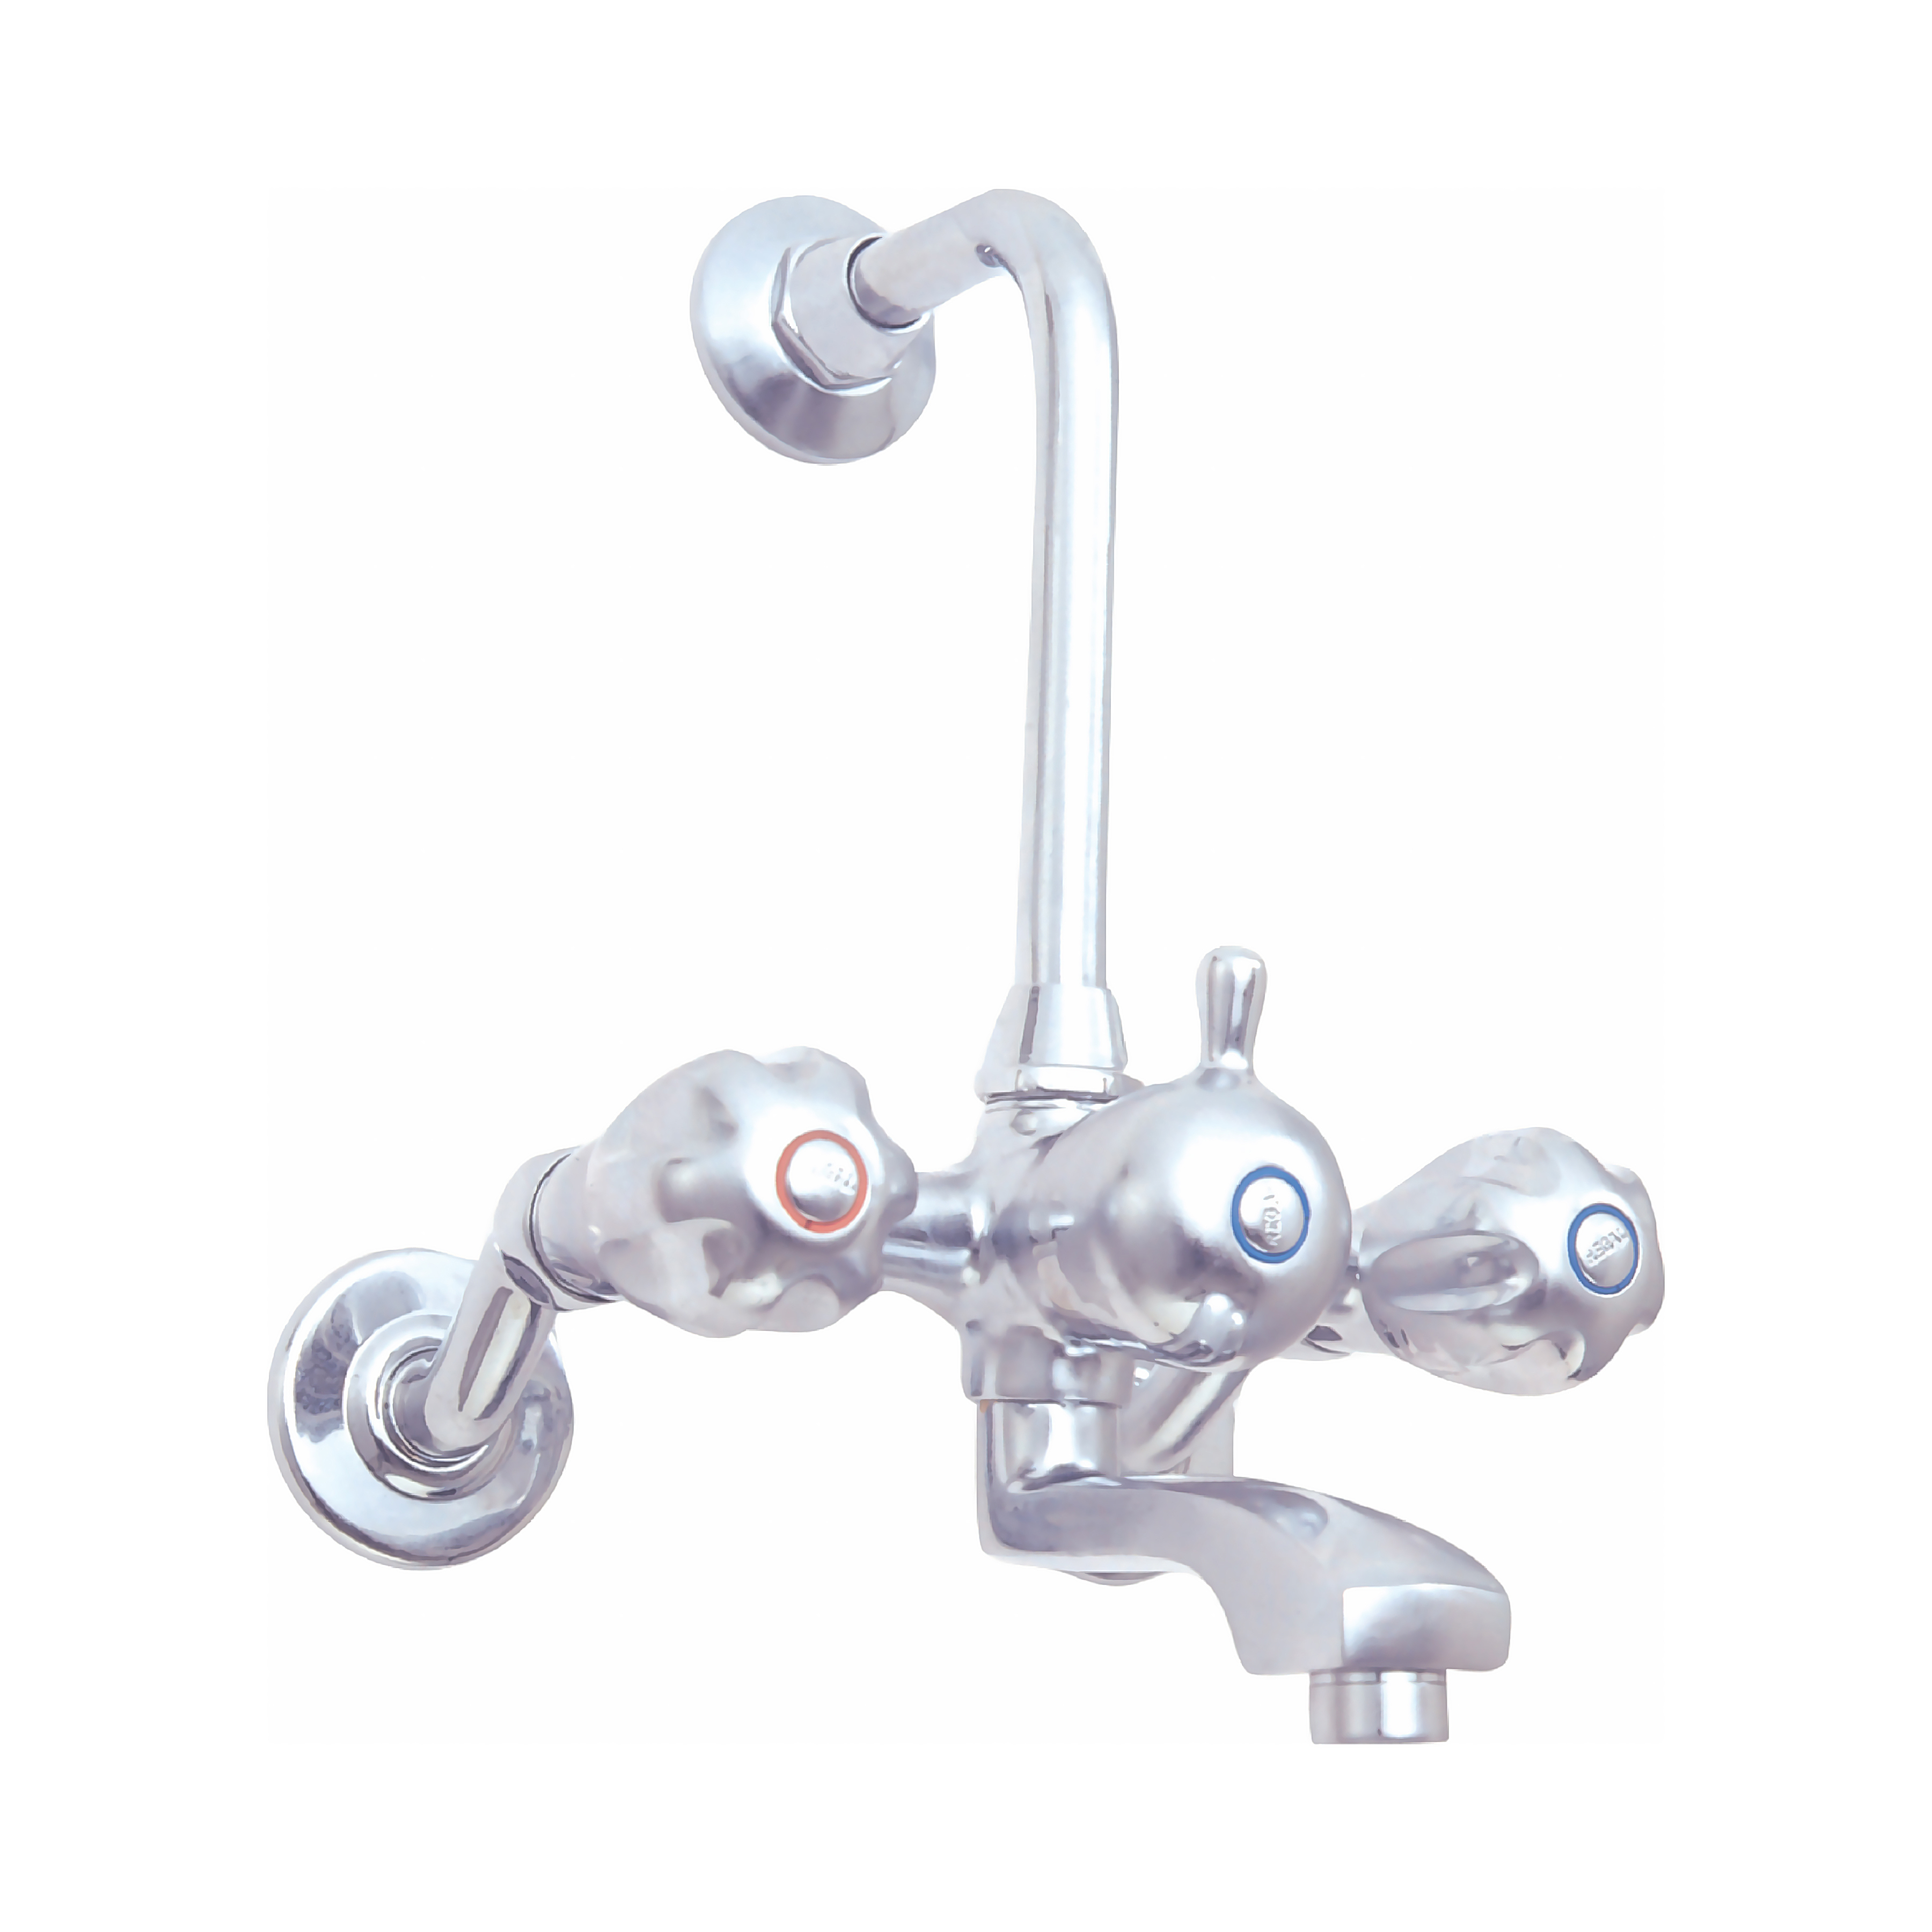 Regent Wall Mixer with Provision for Overhead Shower with Bend Pipe and Wall Flange